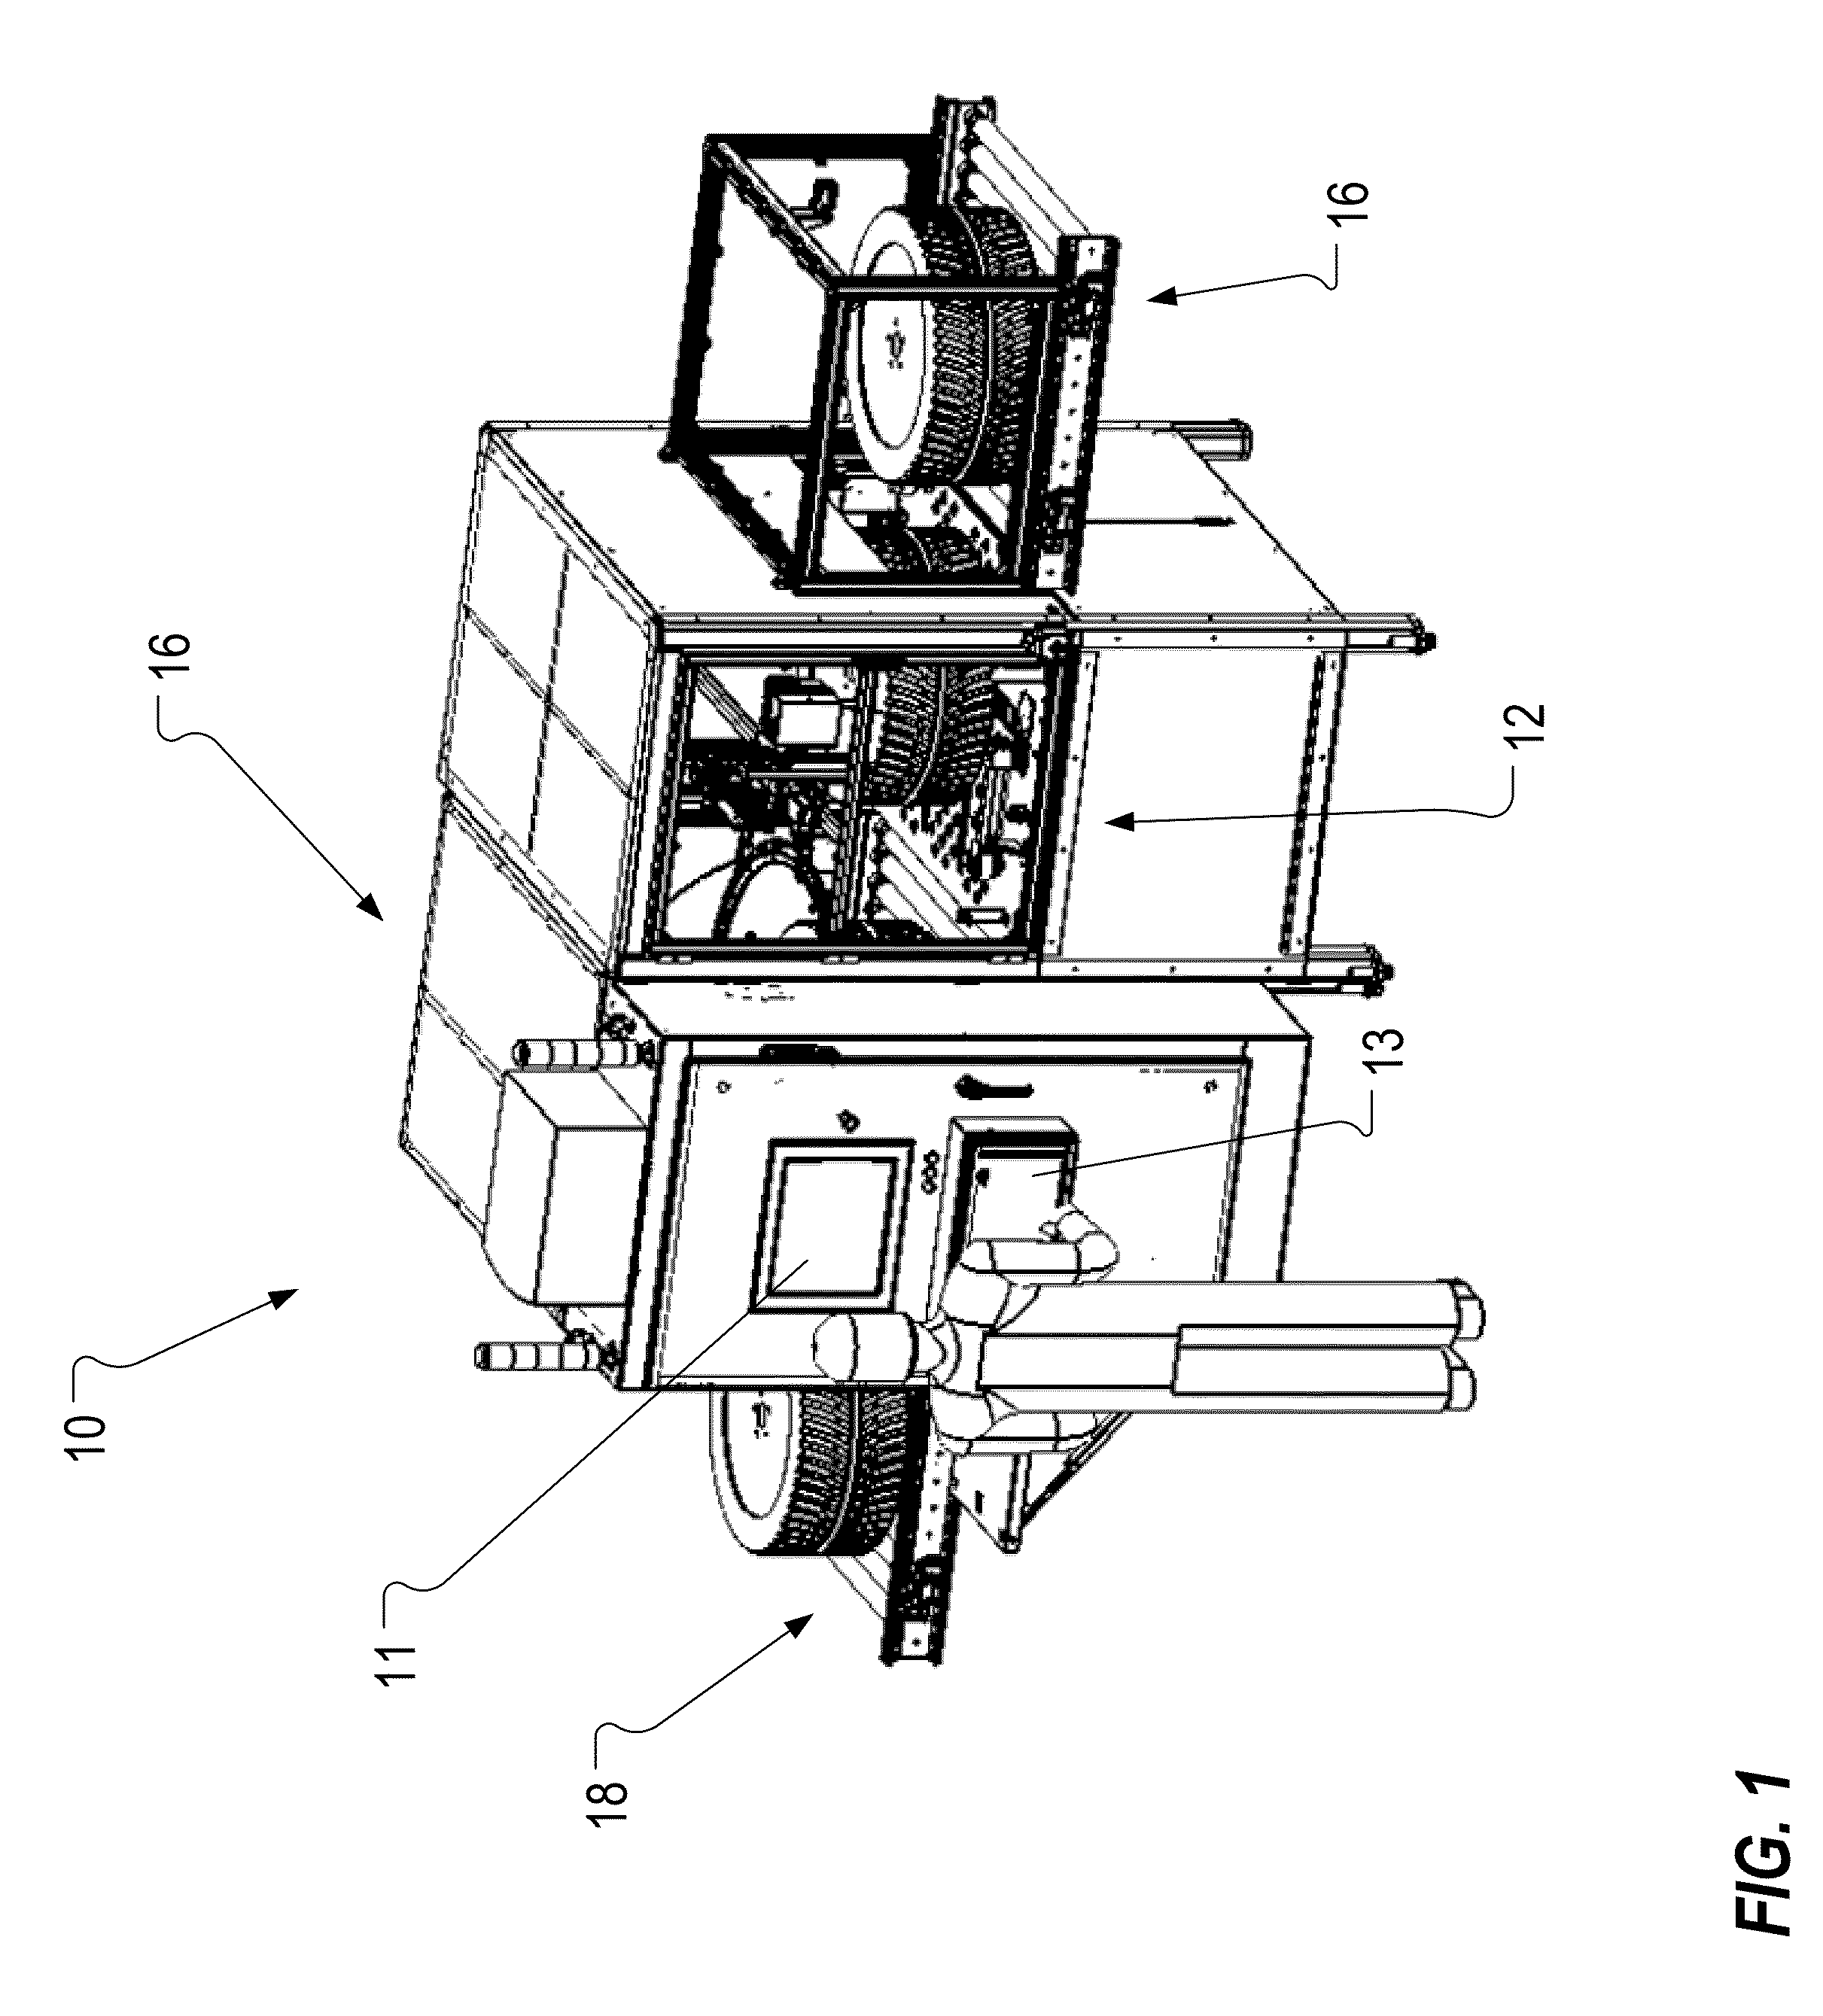 System and methods for inspecting tire wheel assemblies